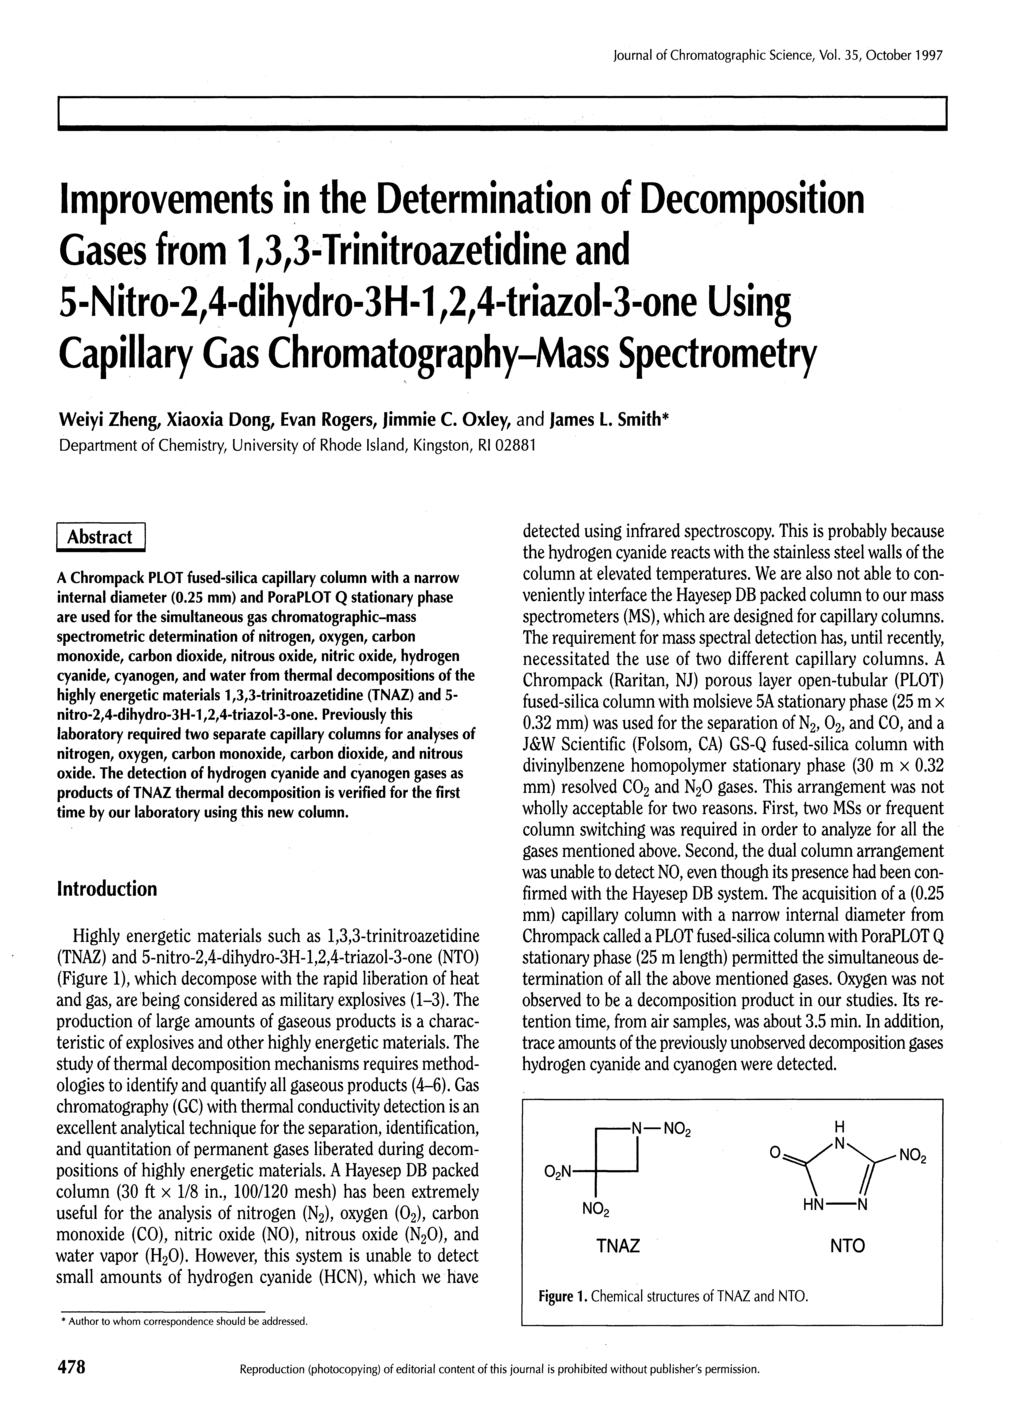 Improvements in the Determination of Decomposition Gases from 1,3,3-Trinitroazetidine and 5-Nitro-2,4-dihydro-3H-1,2,4,-trizol-3-one using Capillary Gas Chromatography-Mass Spectrometry Weiyi Zheng,